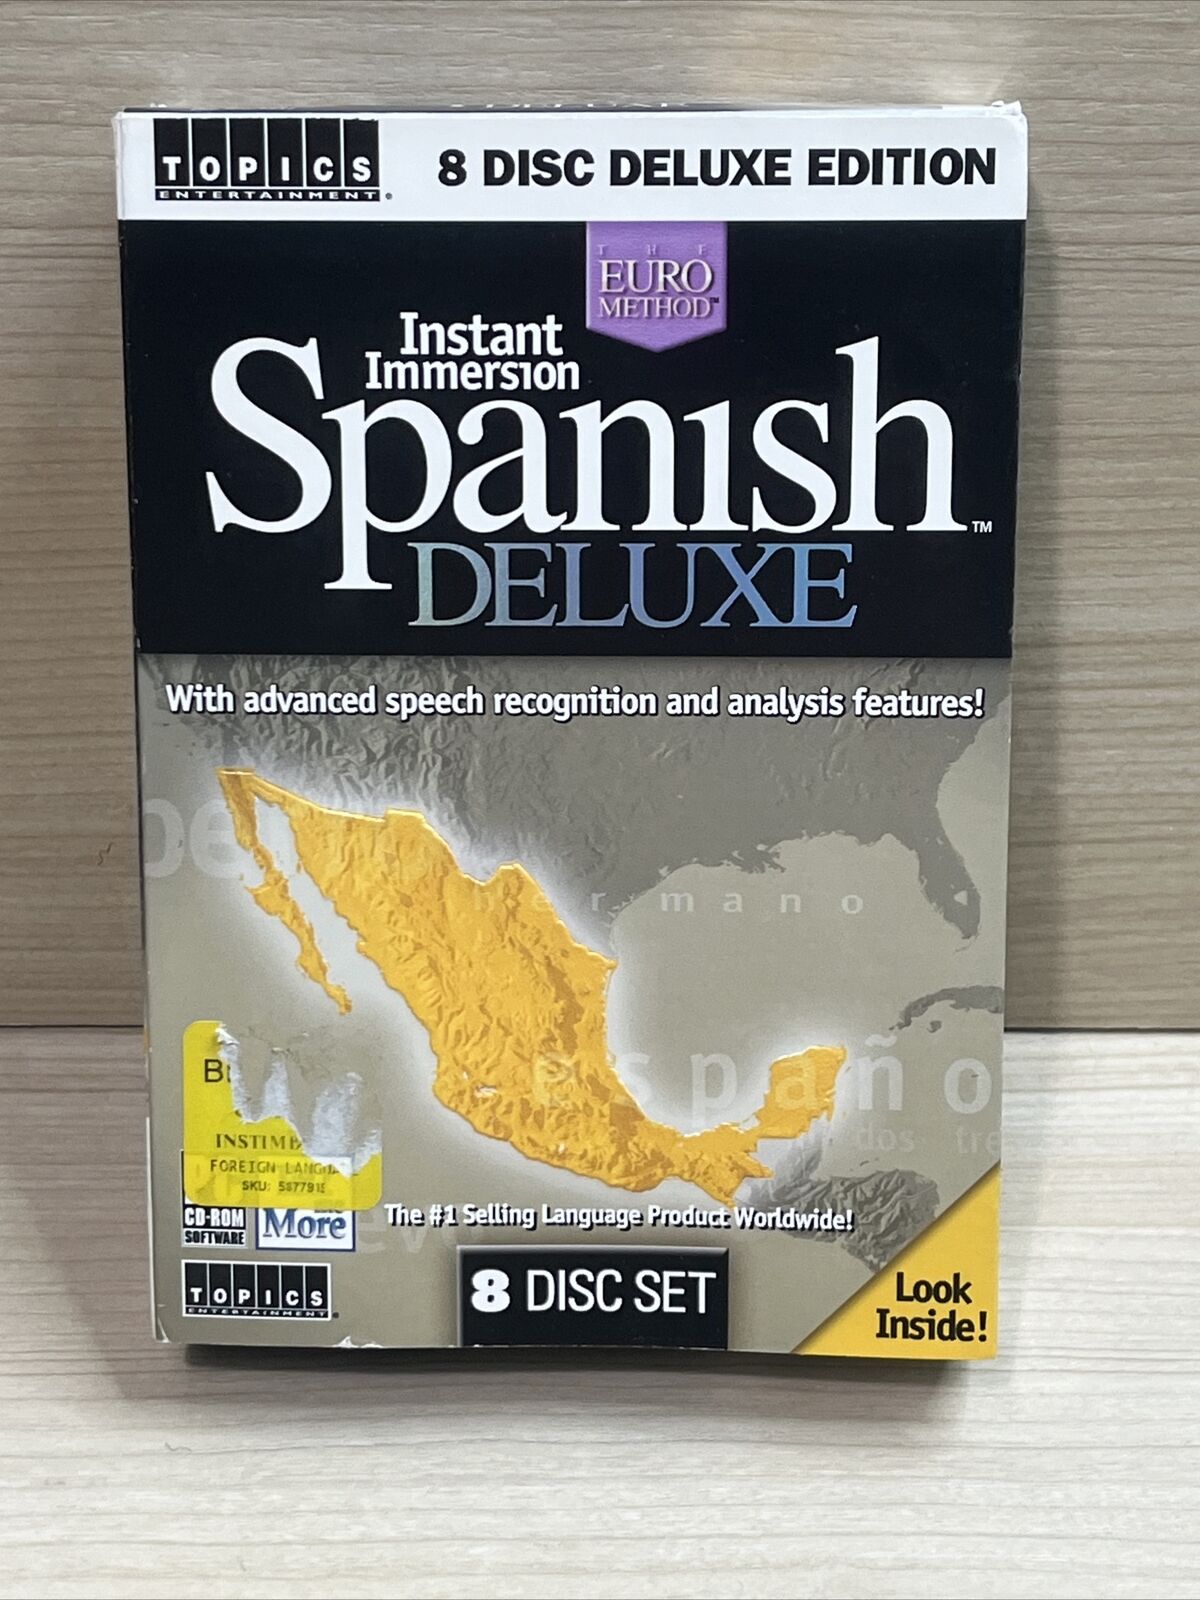 Spanish Deluxe Instant Immersion PC 8 CD Rom by Topics Entertainment